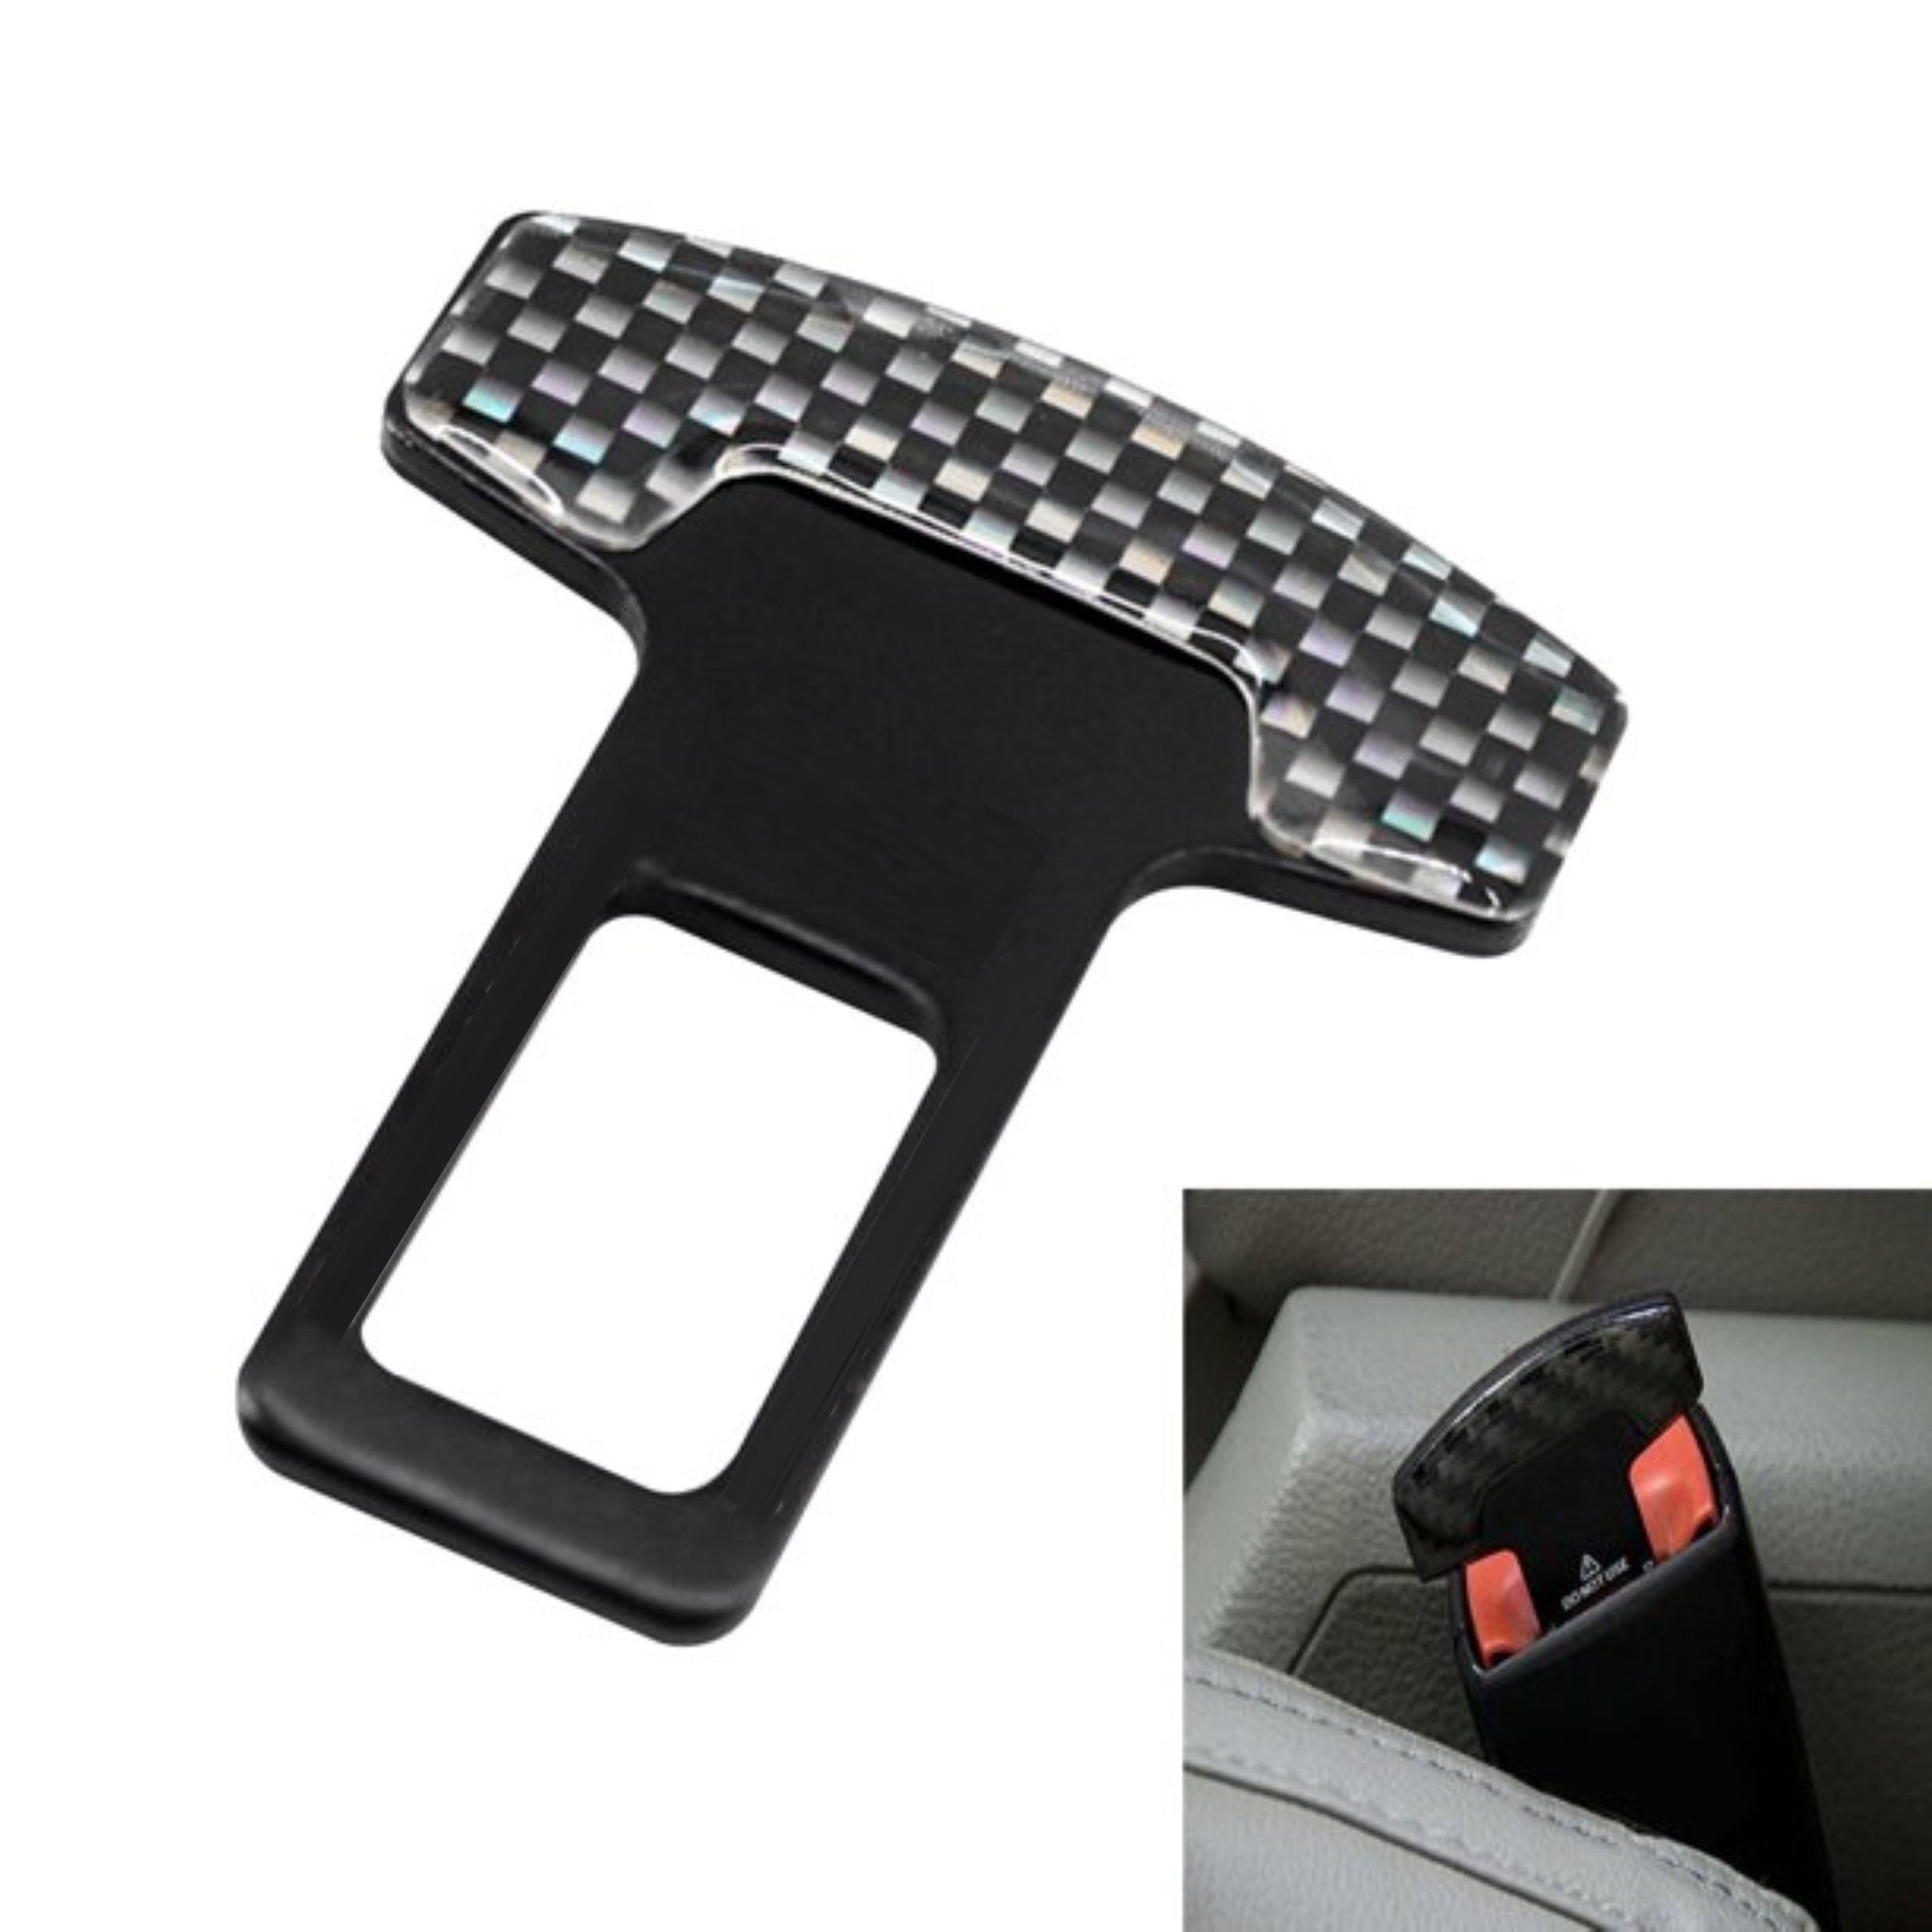 Universal Vehicle Safety Car Seat Belt Alarm Stopper Alloy Buckle  Carbon  Fibre Replacement Kit – Beep LED Silencer Null Insert Clip Part useful for  All Cars Daily Purpose –